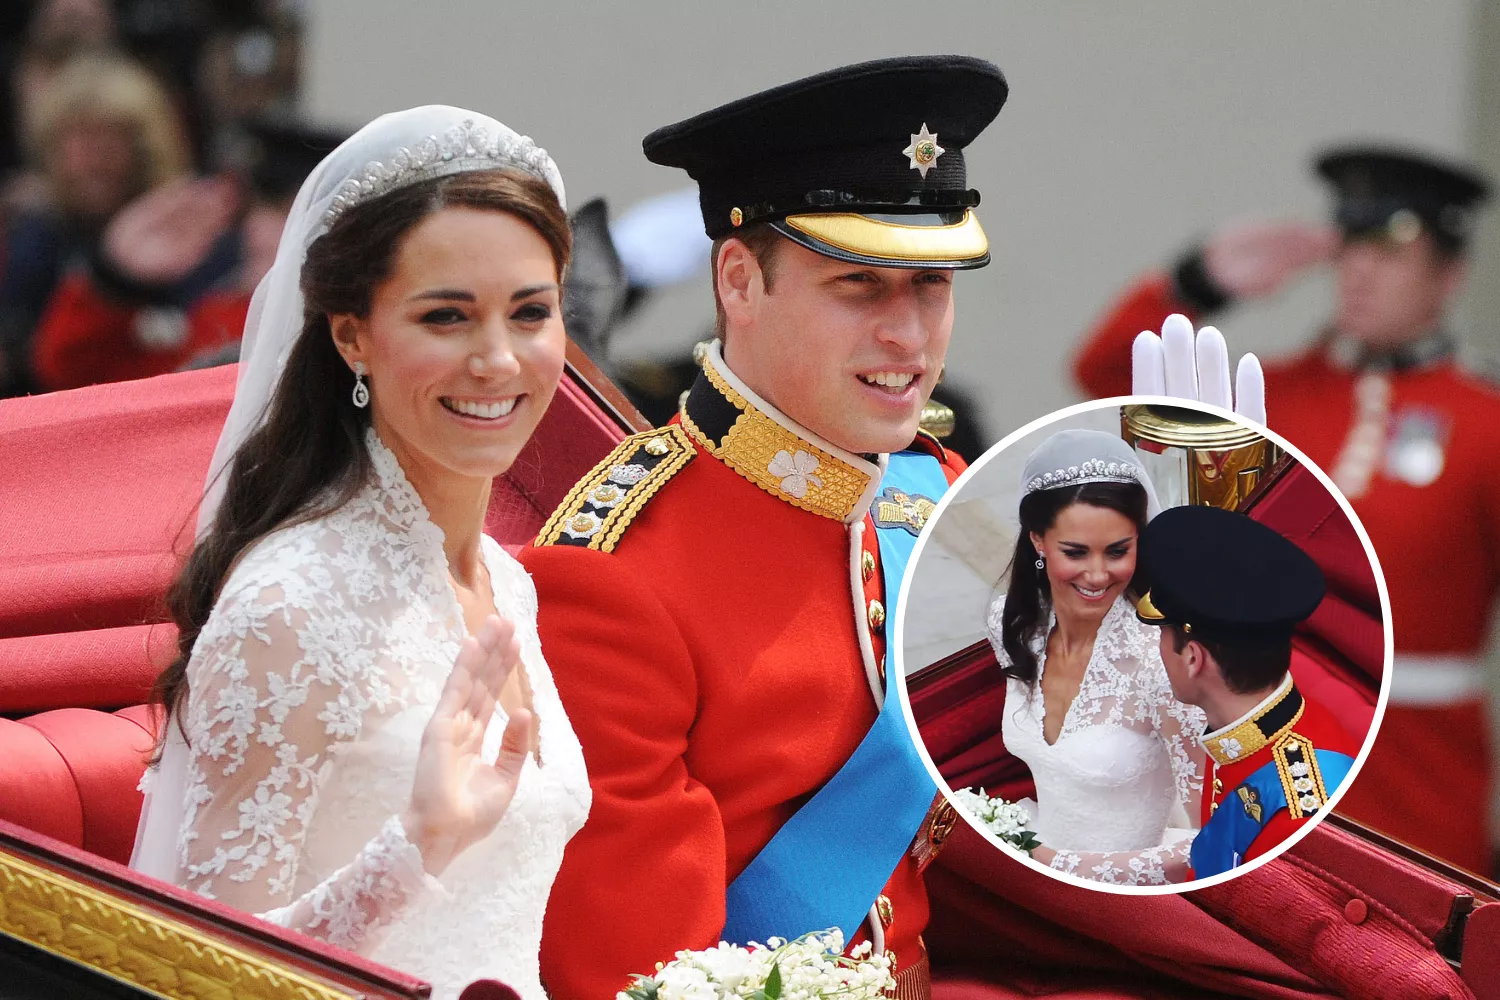 Kate Middleton's Wedding Comment to Prince William Shared: 'Are You Happy?'